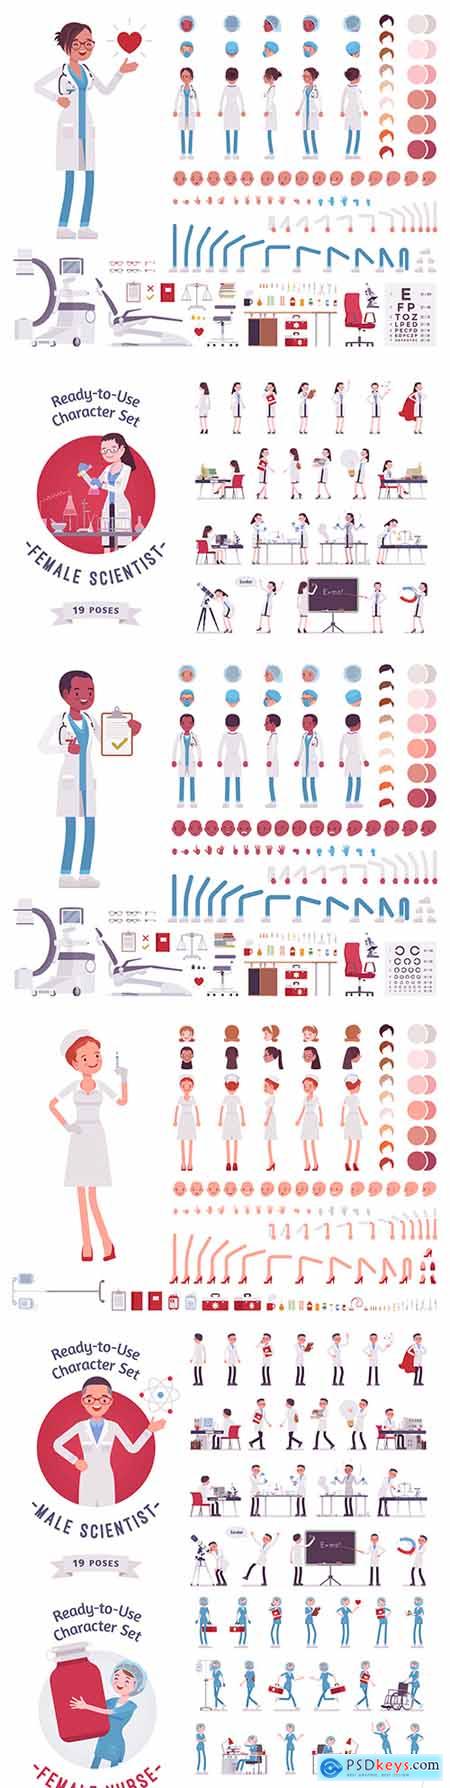 Doctor and nurse cartoon designer from different body parts and items